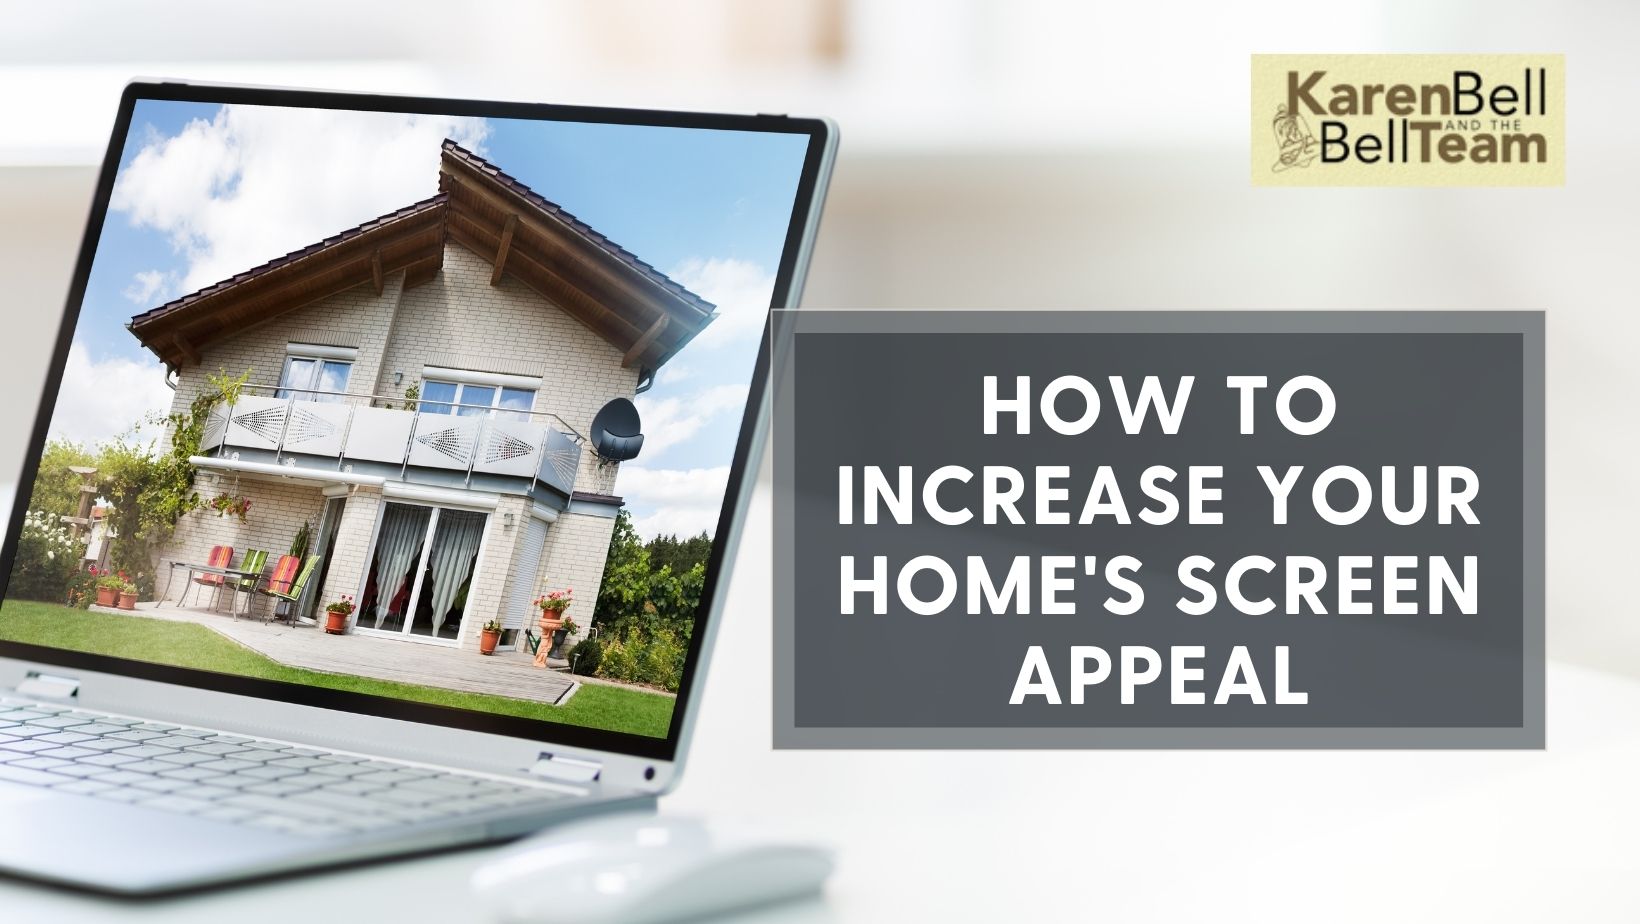 How to Increase Your Home's Screen Appeal